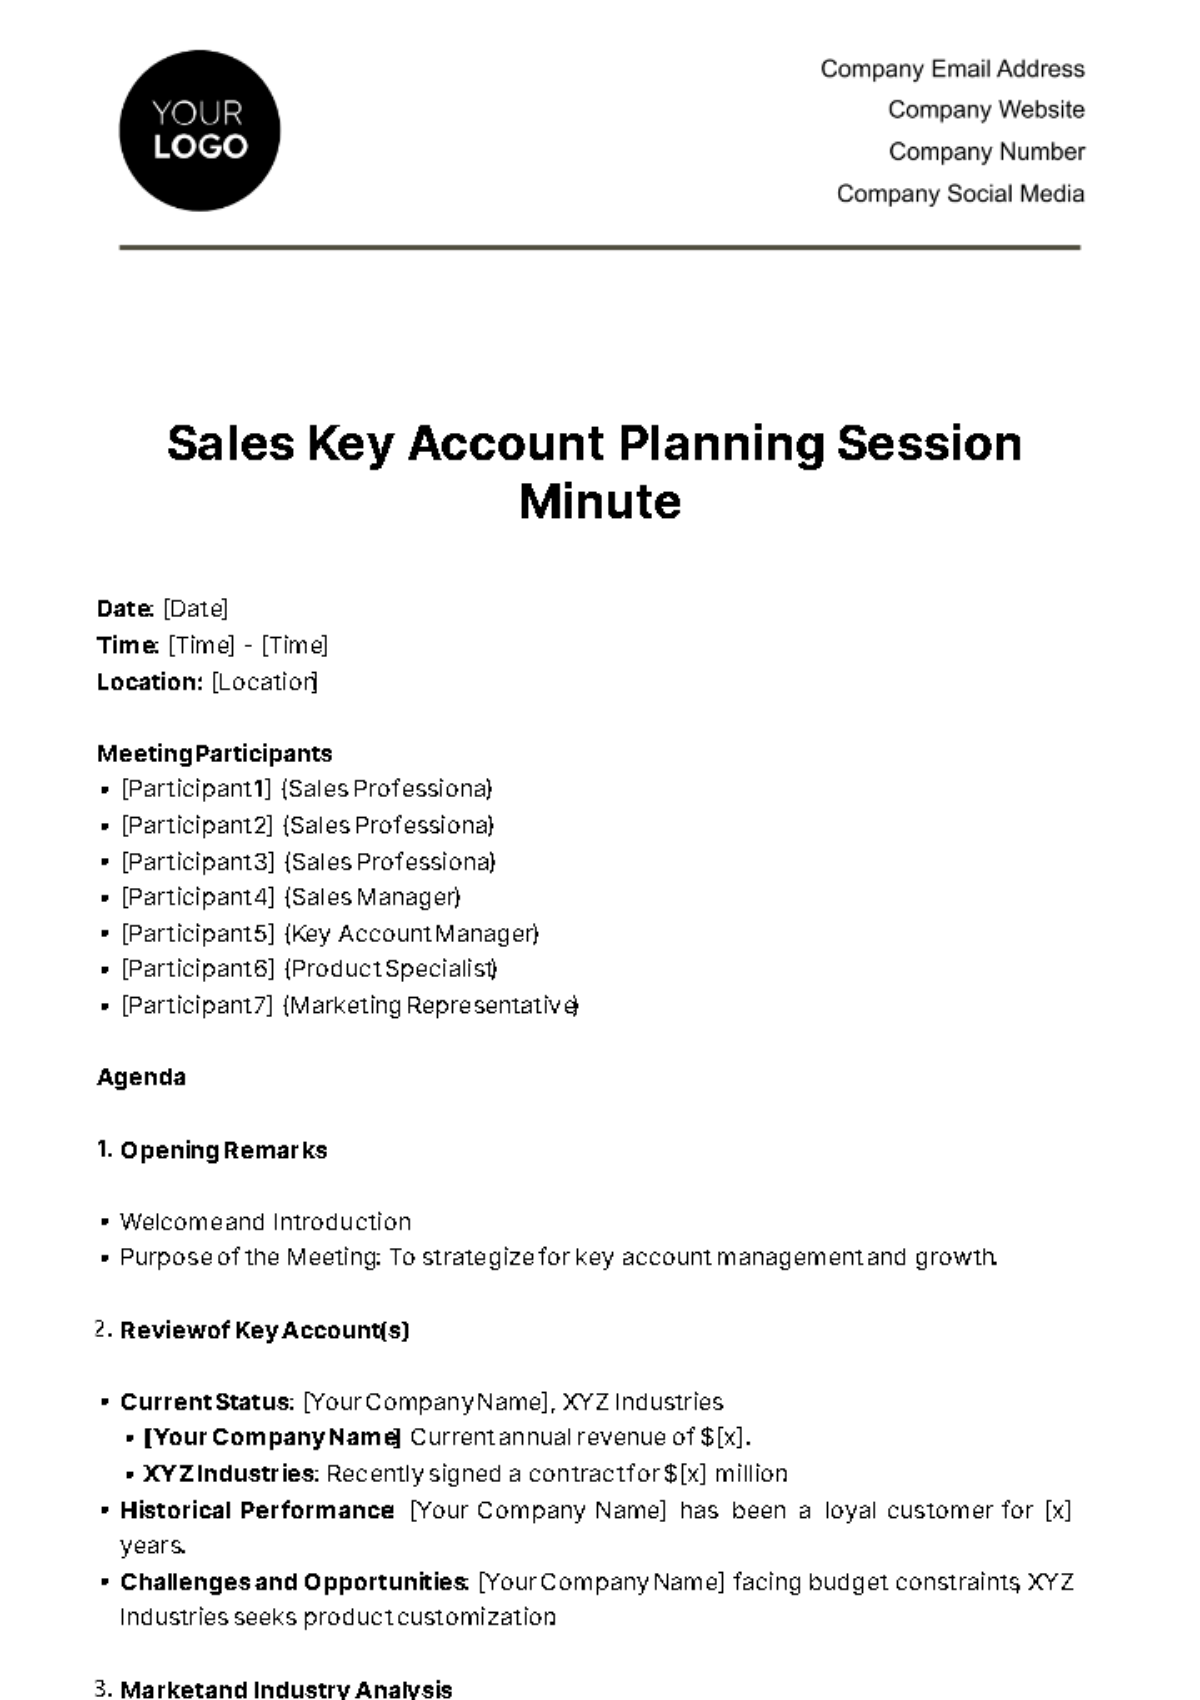 Free Sales Key Account Planning Session Minute Template